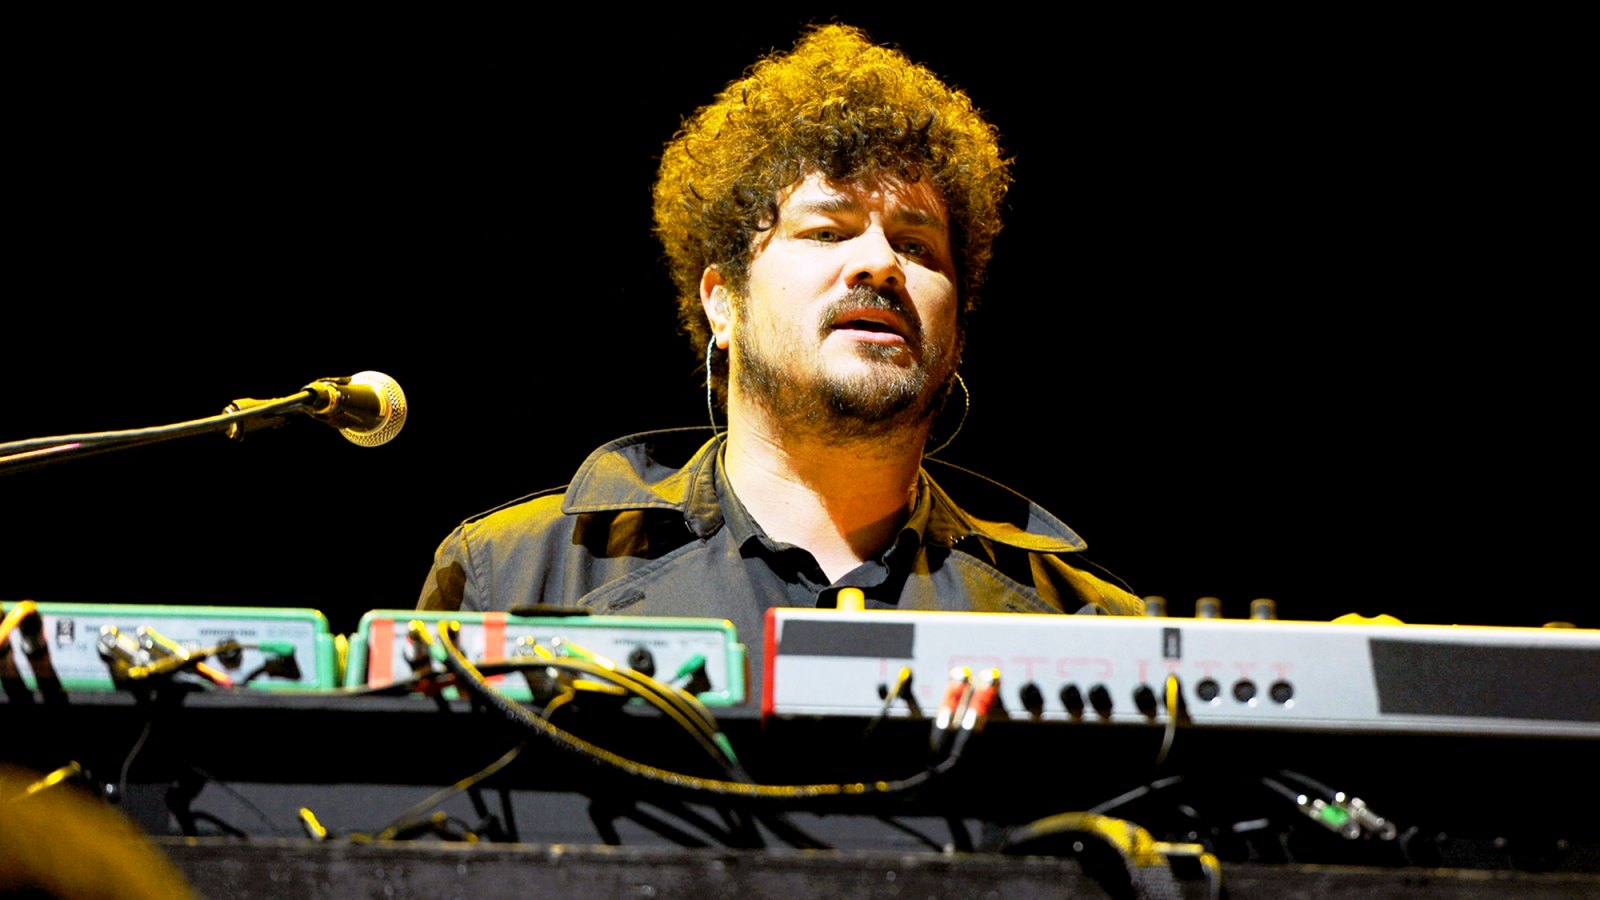 Richard Swift performs onstage during the 2012 Coachella Valley Music & Arts Festival at the Empire Polo Field in Indio, California.